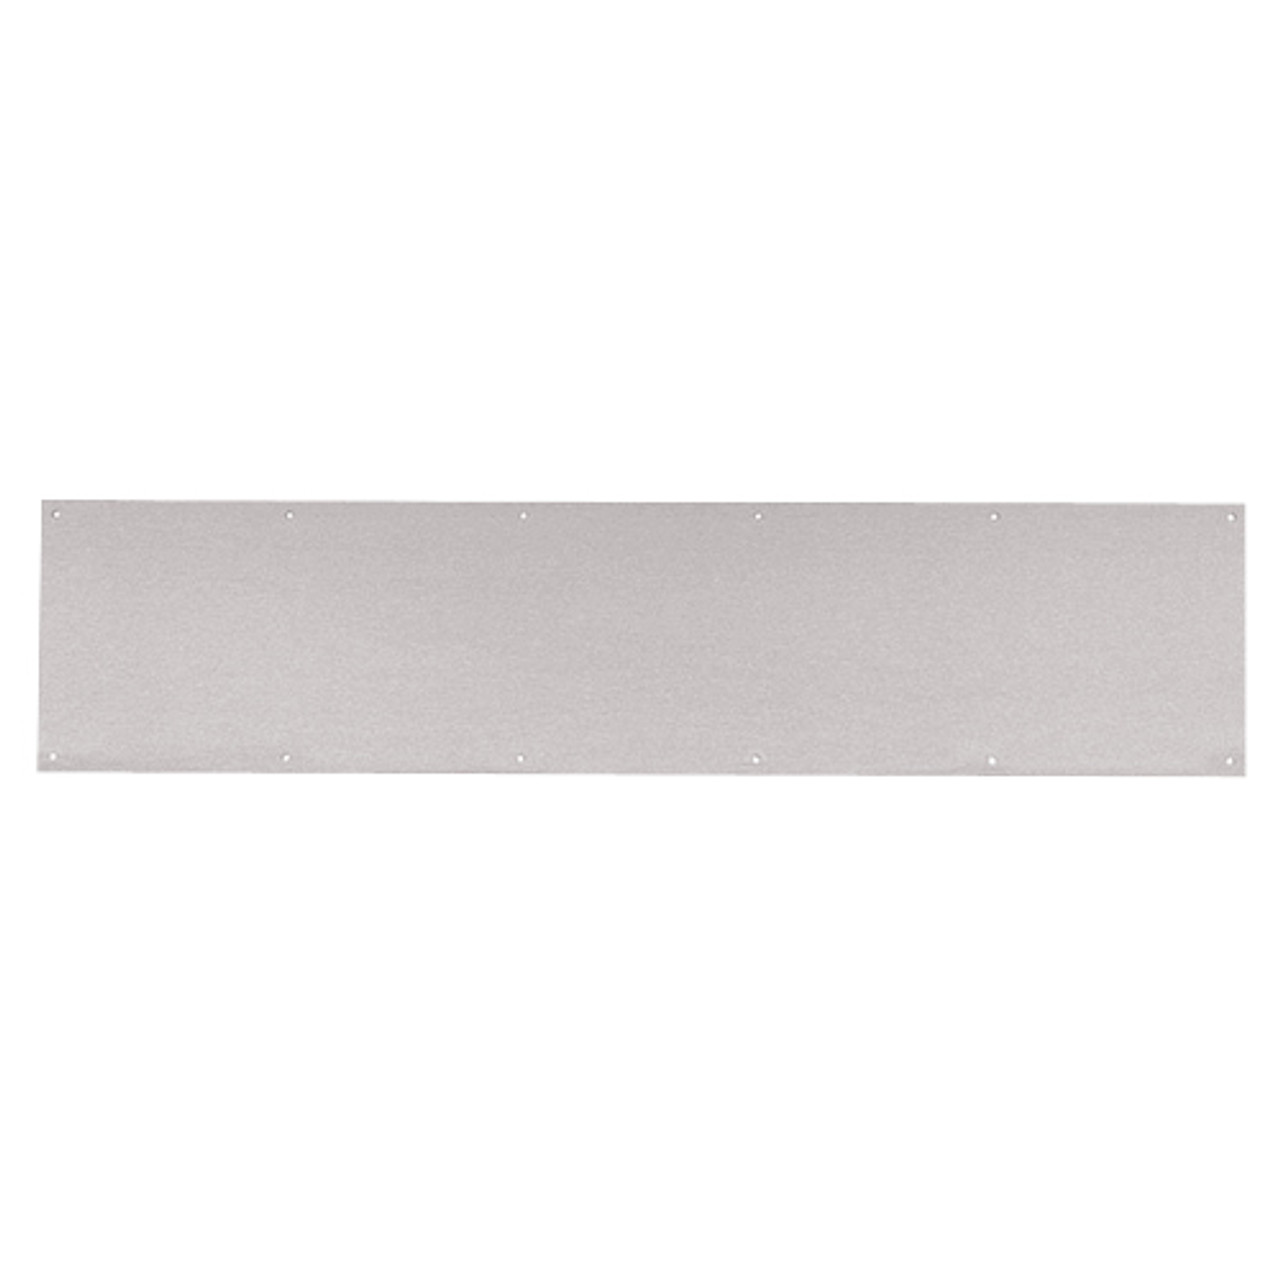 8400-US32D-38x44-B-CS Ives 8400 Series Protection Plate in Satin Stainless Steel